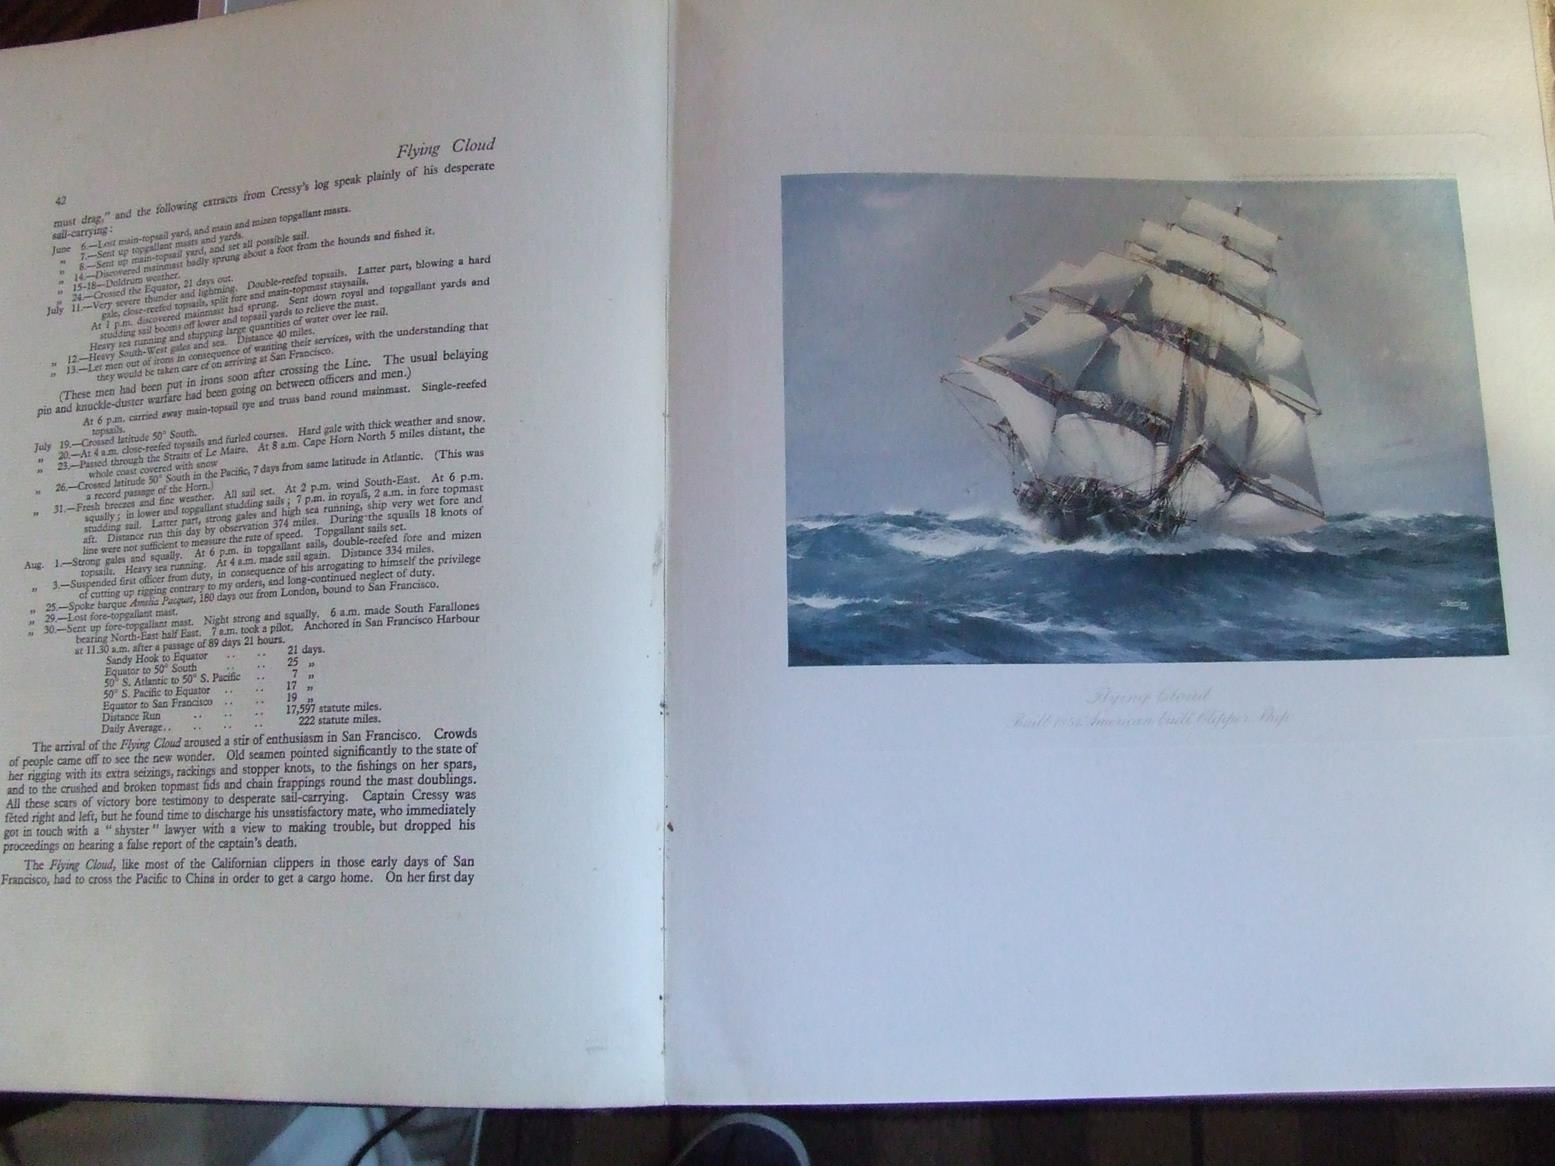 Sail, the romance of the clipper ship. [volume one]